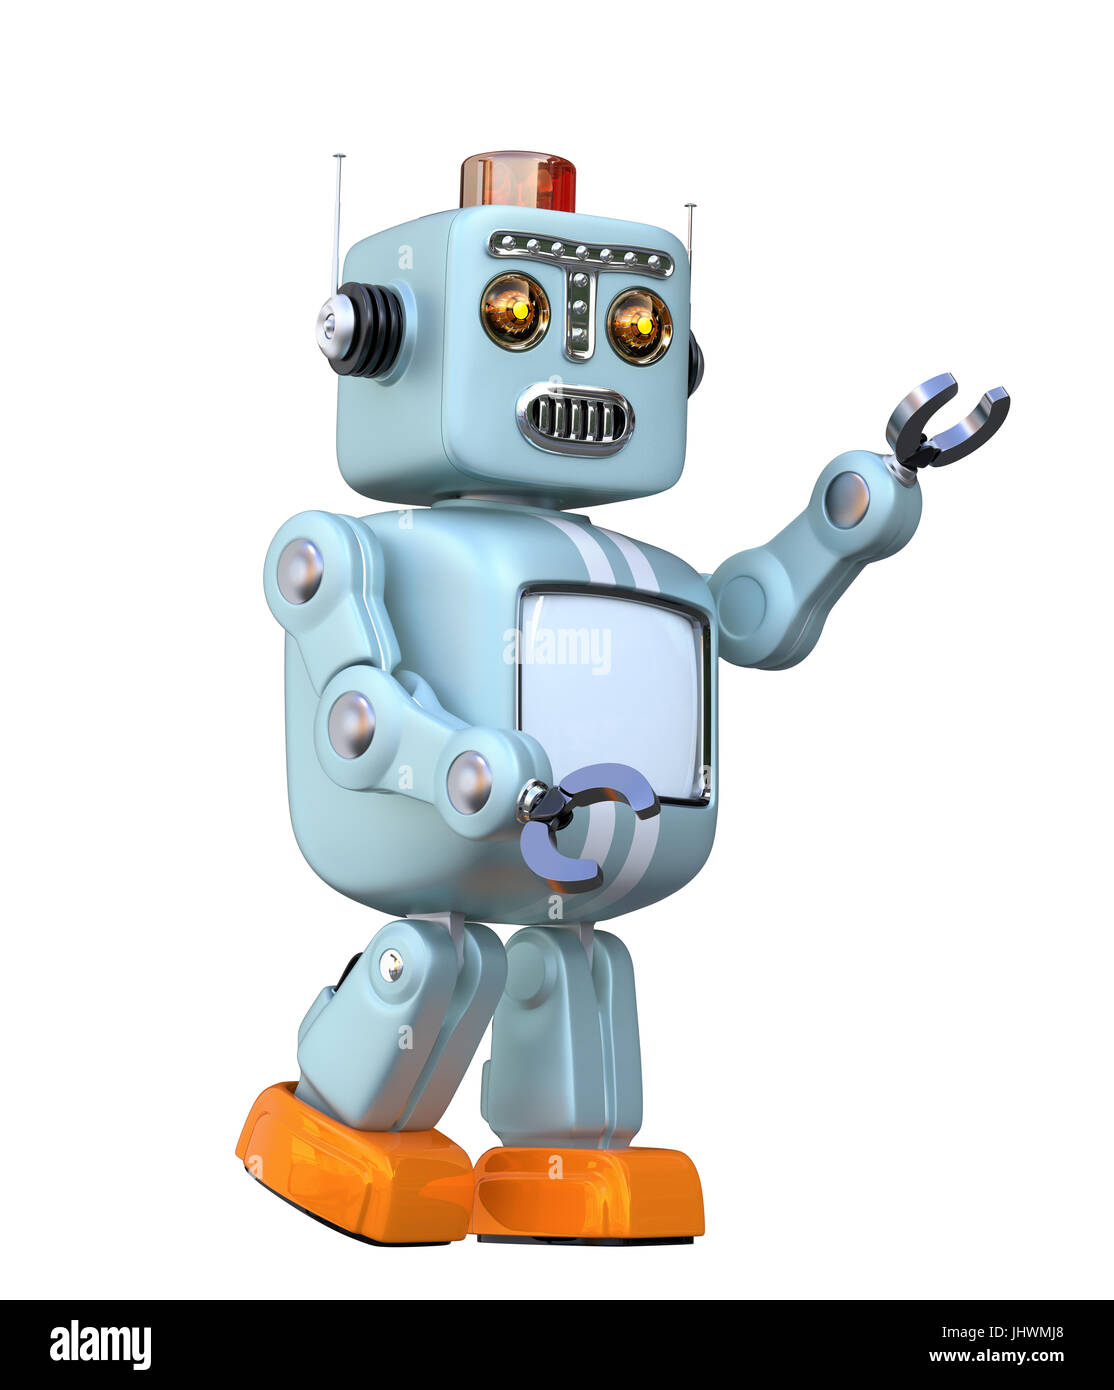 Cuteretro robot isolated on white background. 3D rendering image with clipping path. Stock Photo